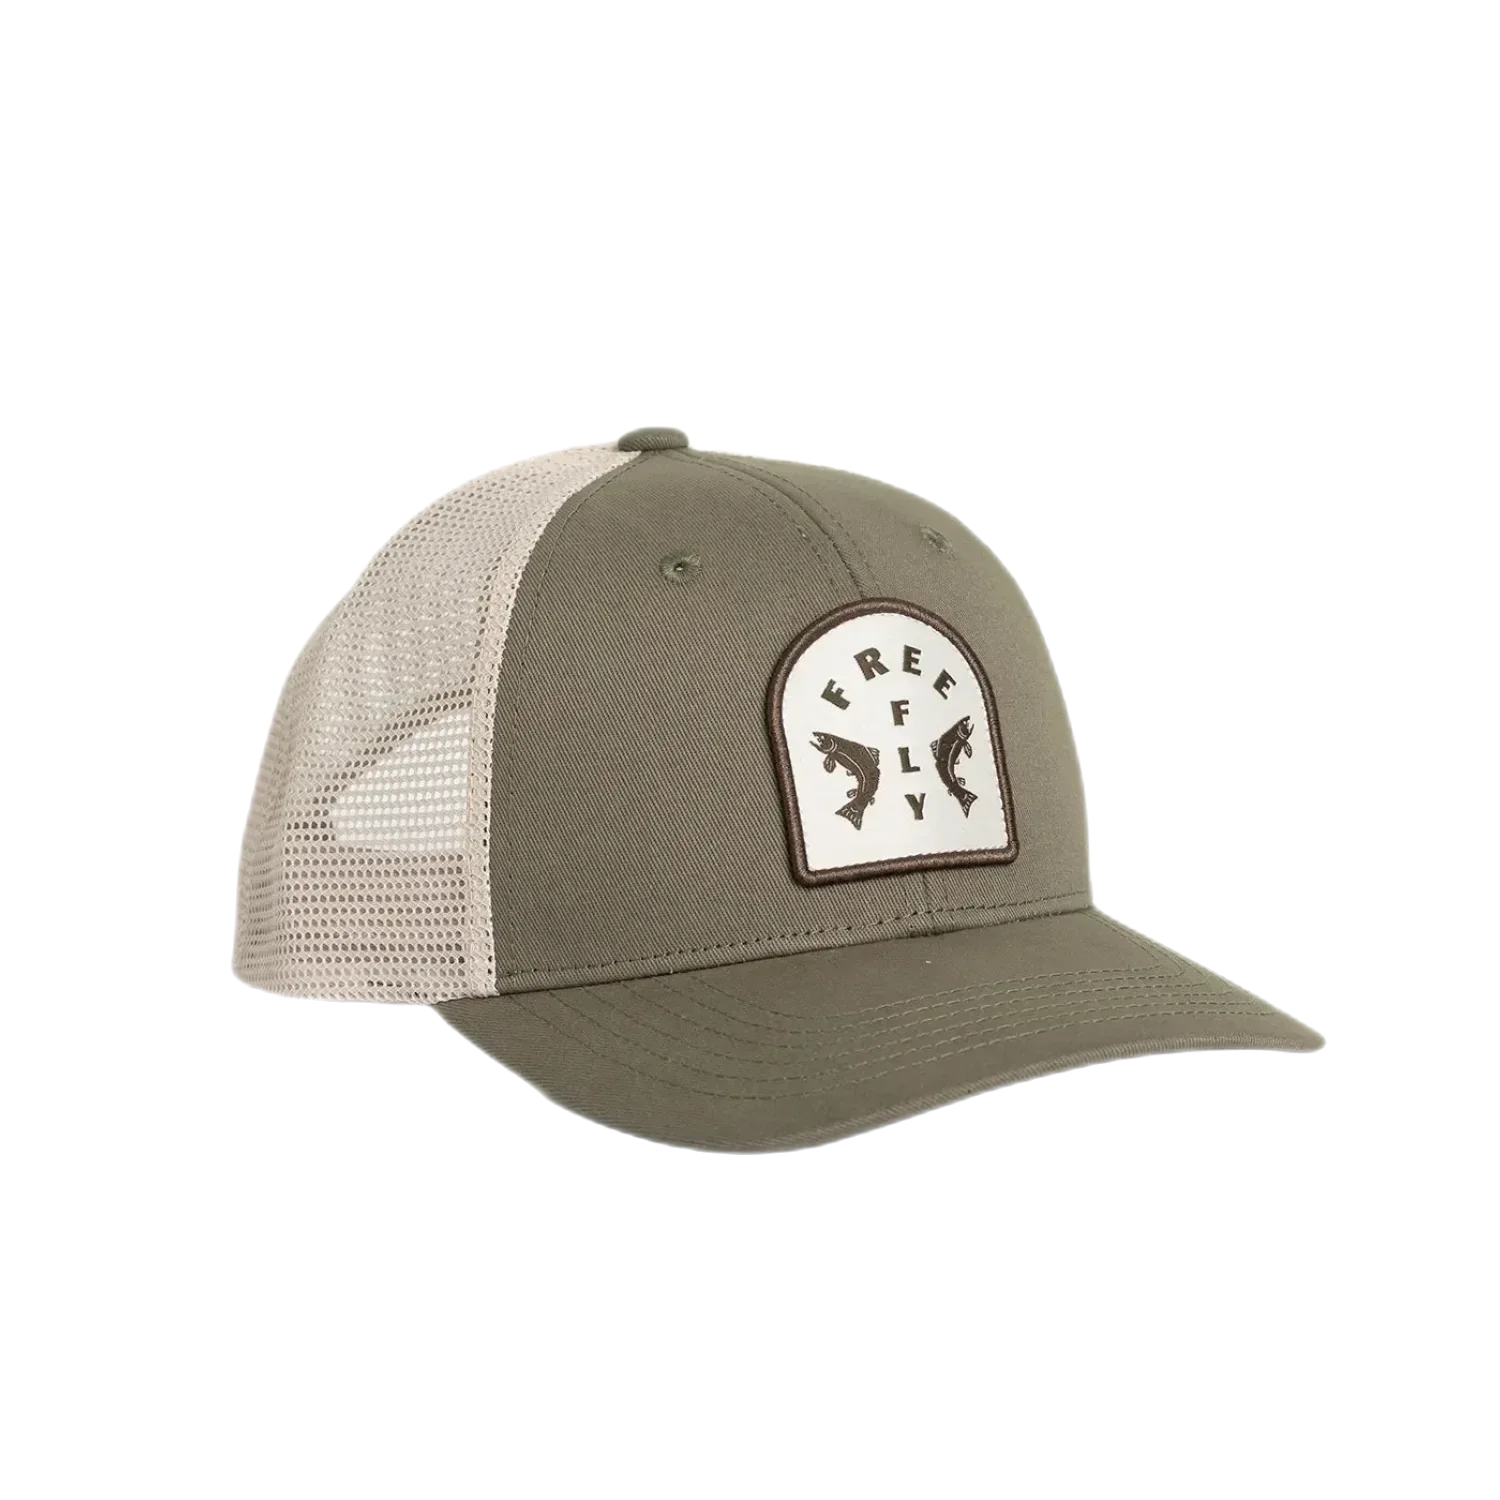 Free Fly Apparel HATS - HATS BILLED - HATS BILLED Doubled Up Trucker Hat CAPERS GREEN M